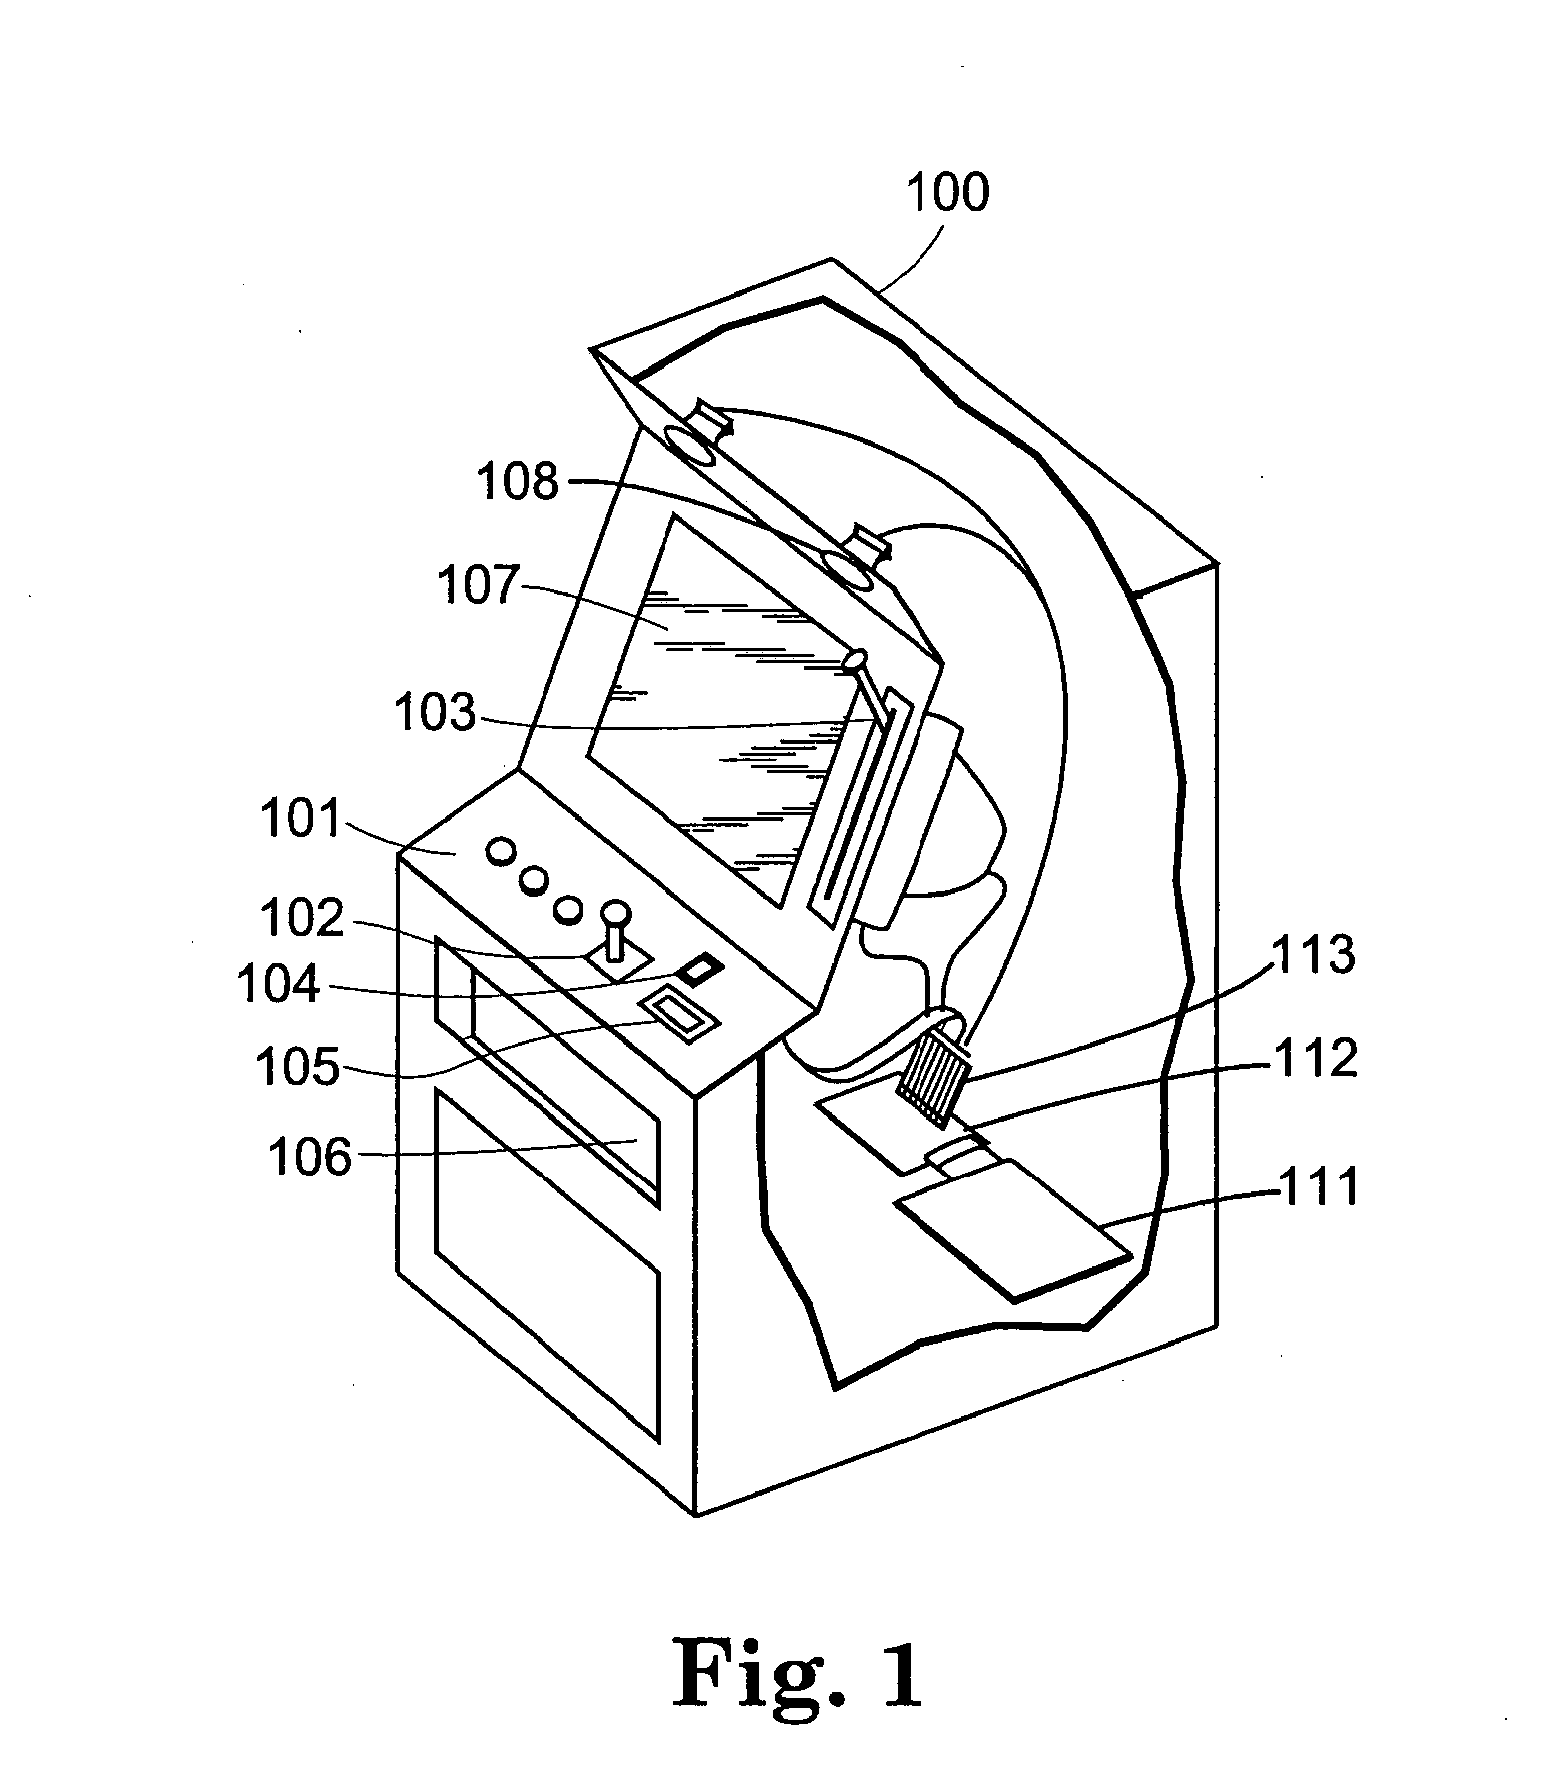 Computerized gaming system, method and apparatus